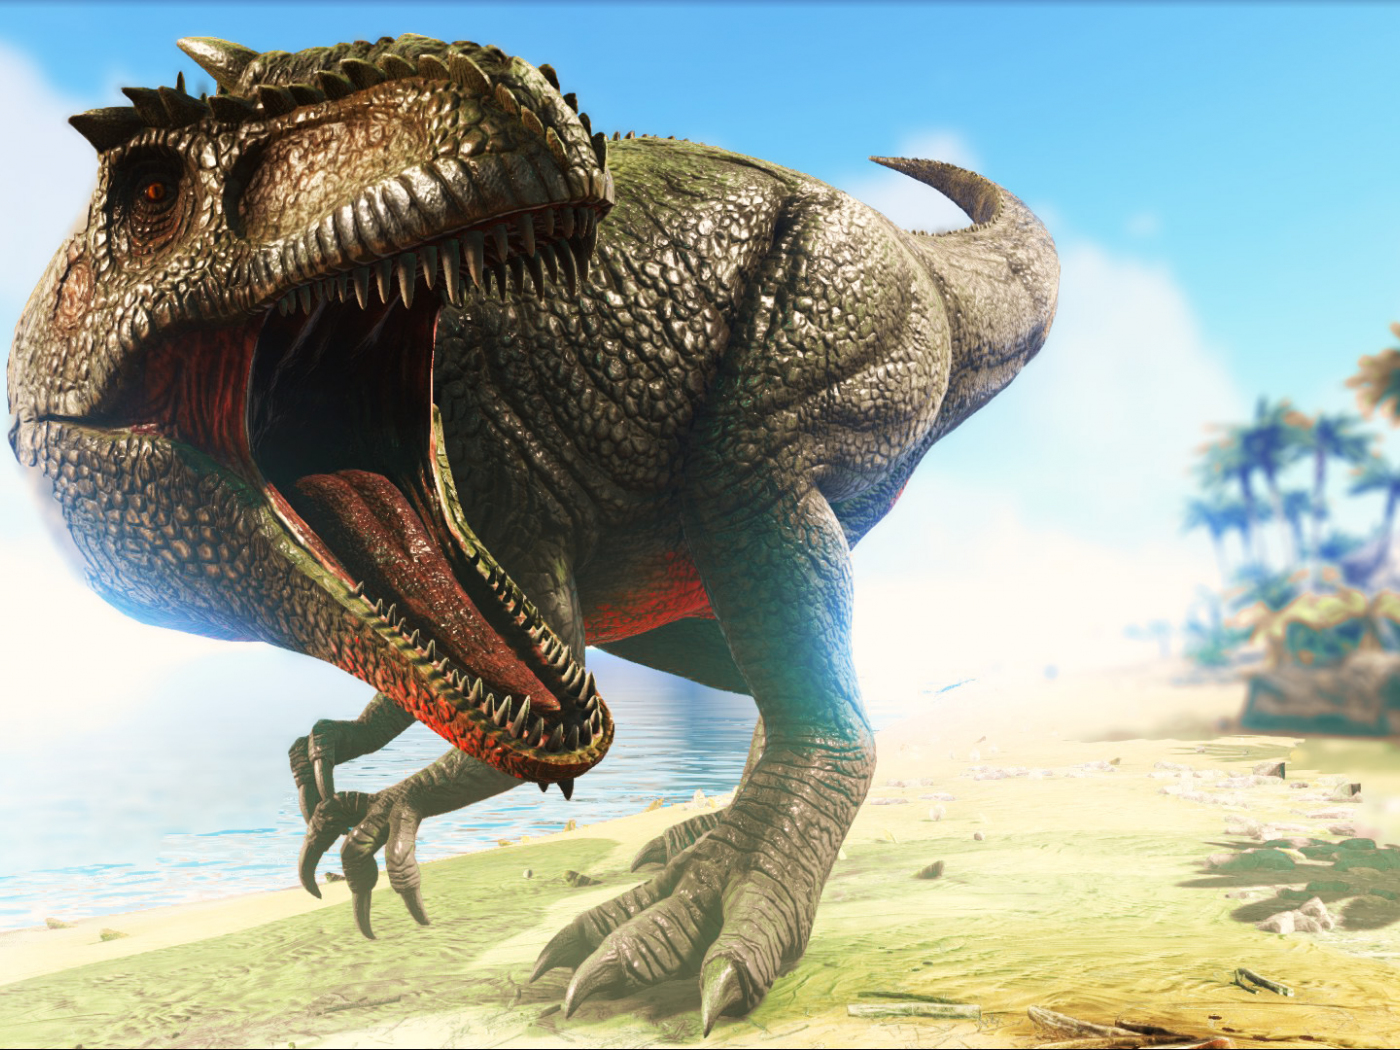 Download 1400x1050 Wallpaper Ark: Survival Evolved, Video Game, Angry  Dinosaur, Standard 4:3, Fullscreen, 1400x1050 Hd Image, Background, 13794